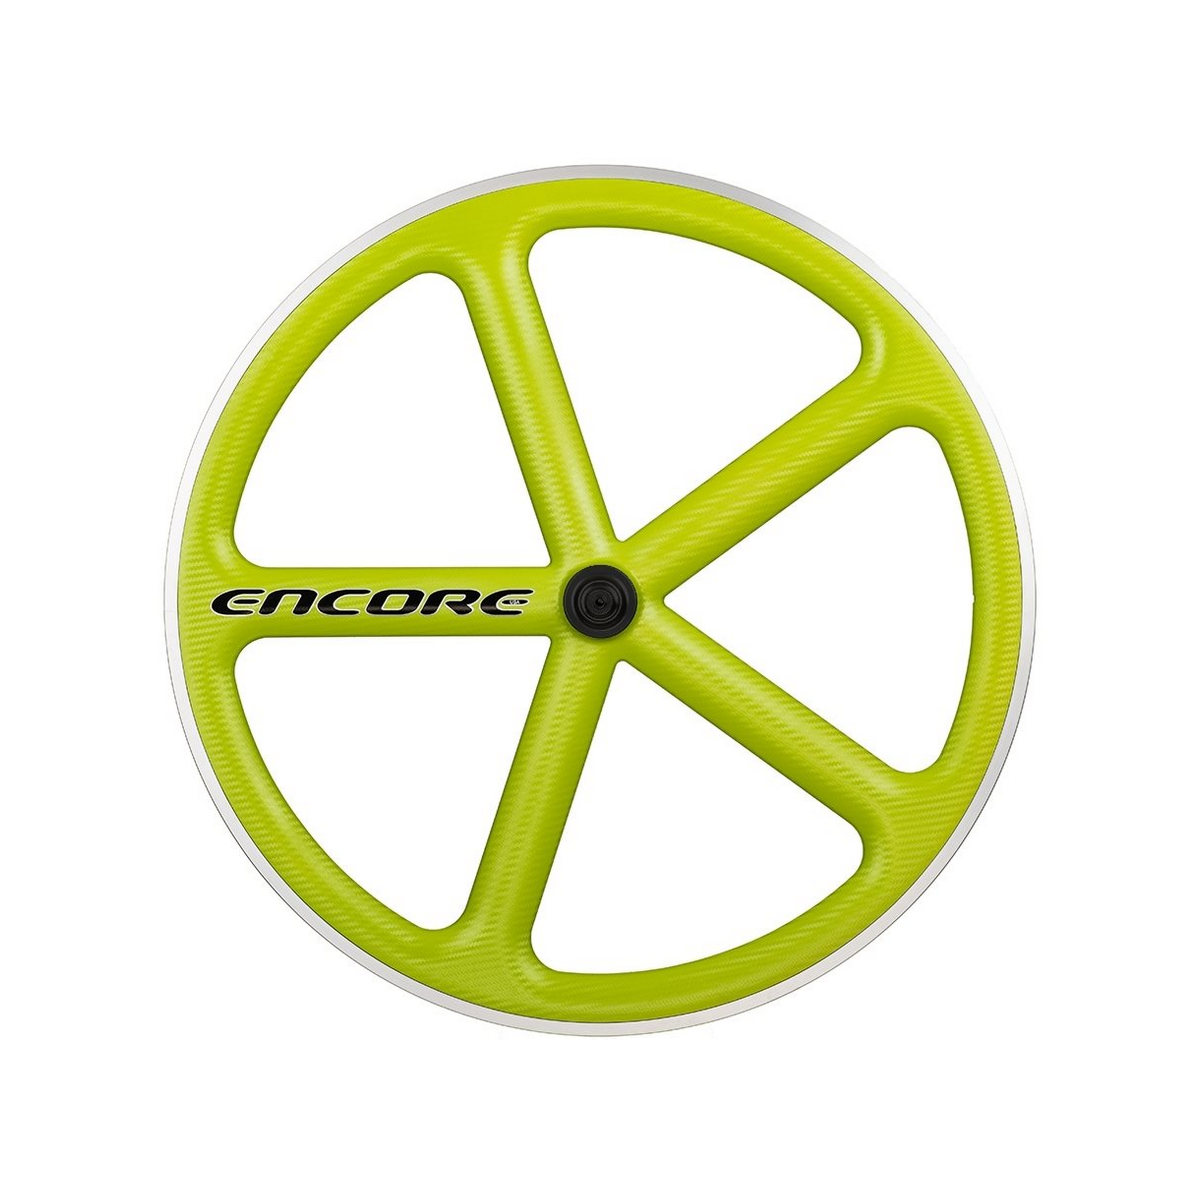 roue arrière 700c track 5 rayons carbone tissage lime msw